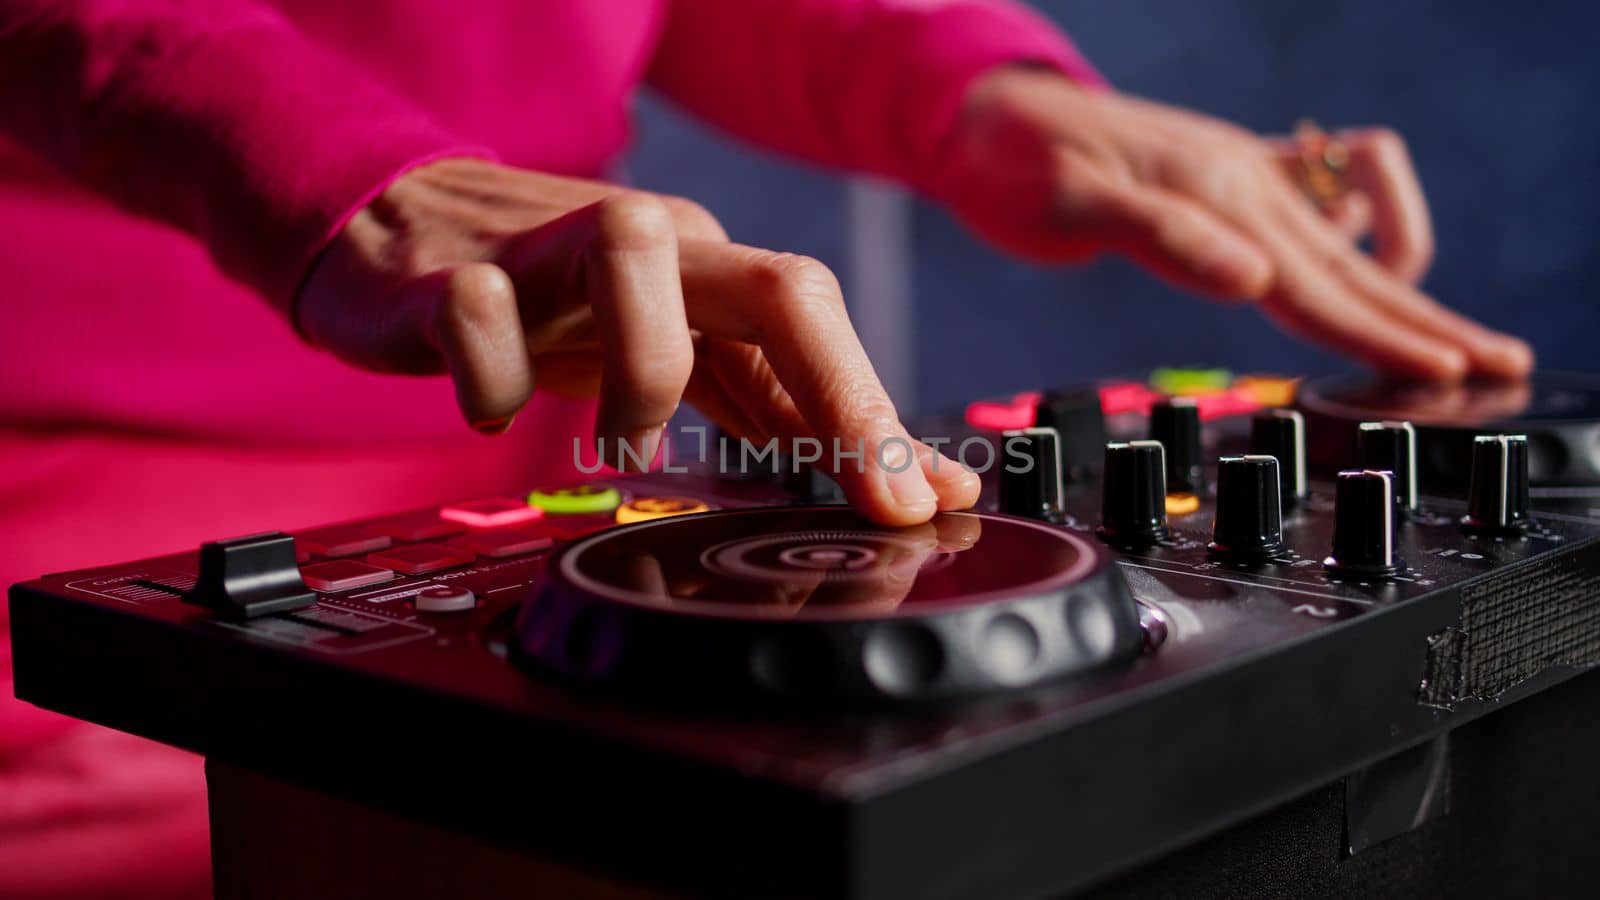 Musician standing at dj table mixing sound by DCStudio